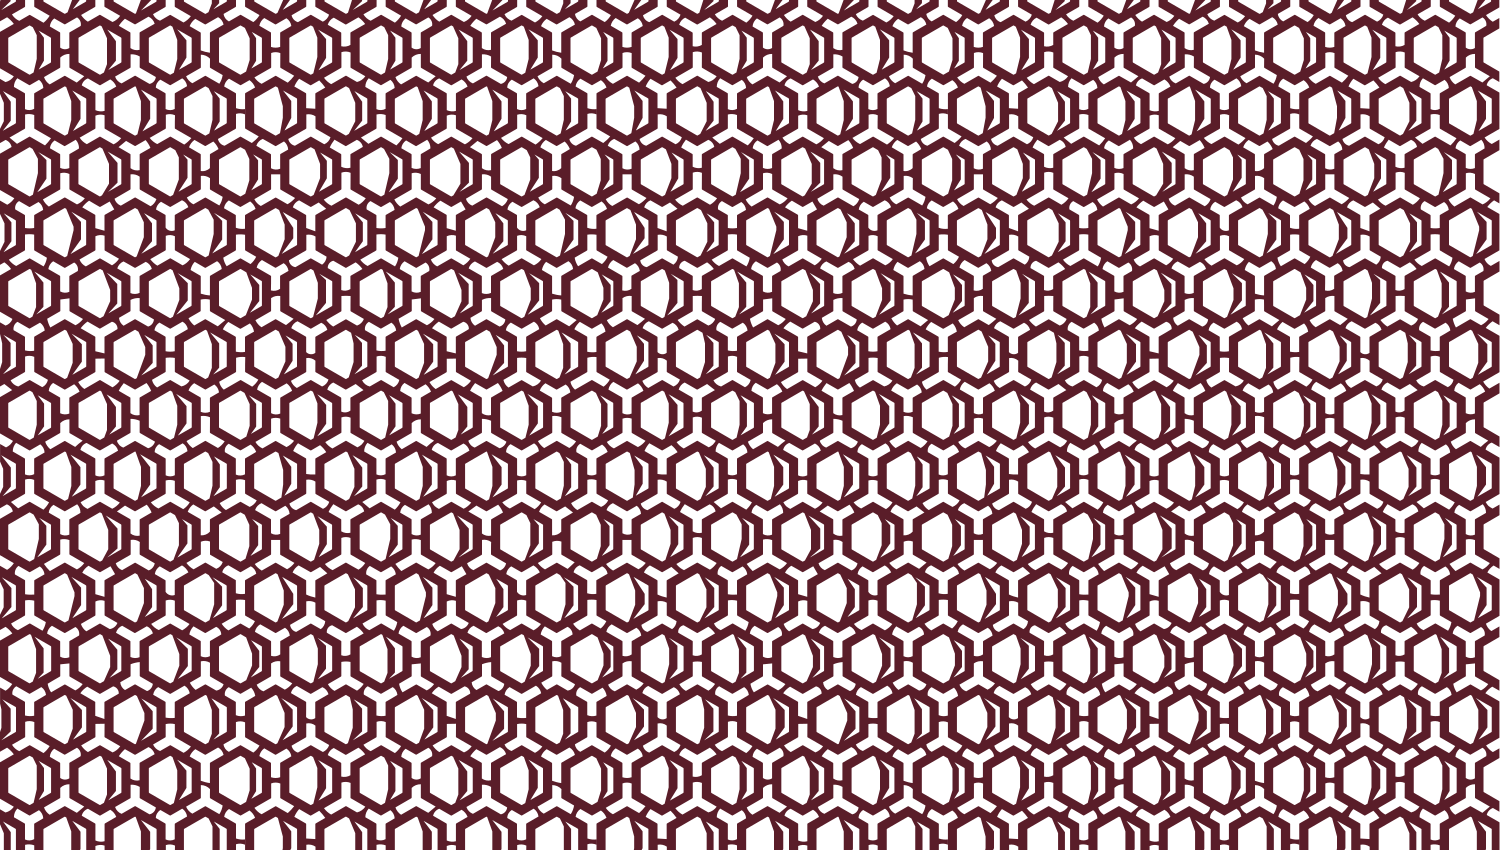 Parasoleil™ Minoan© pattern displayed with a burgundy color overlay